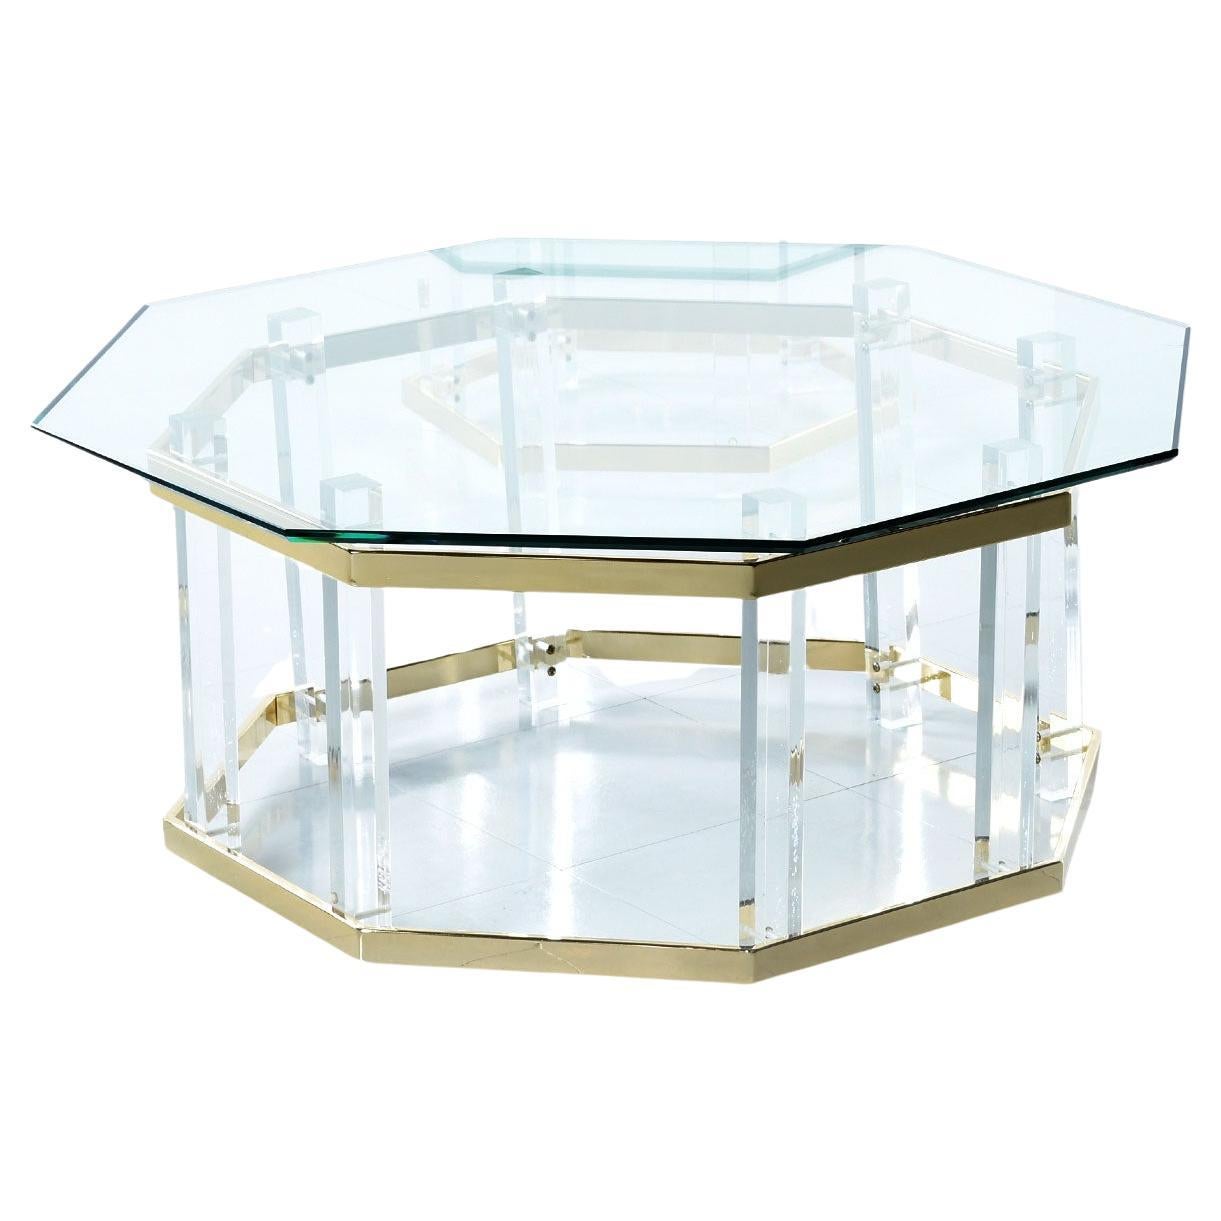 Lucite Acrylic Glass and Brass Coffee Table 1970s Hollywood Regency